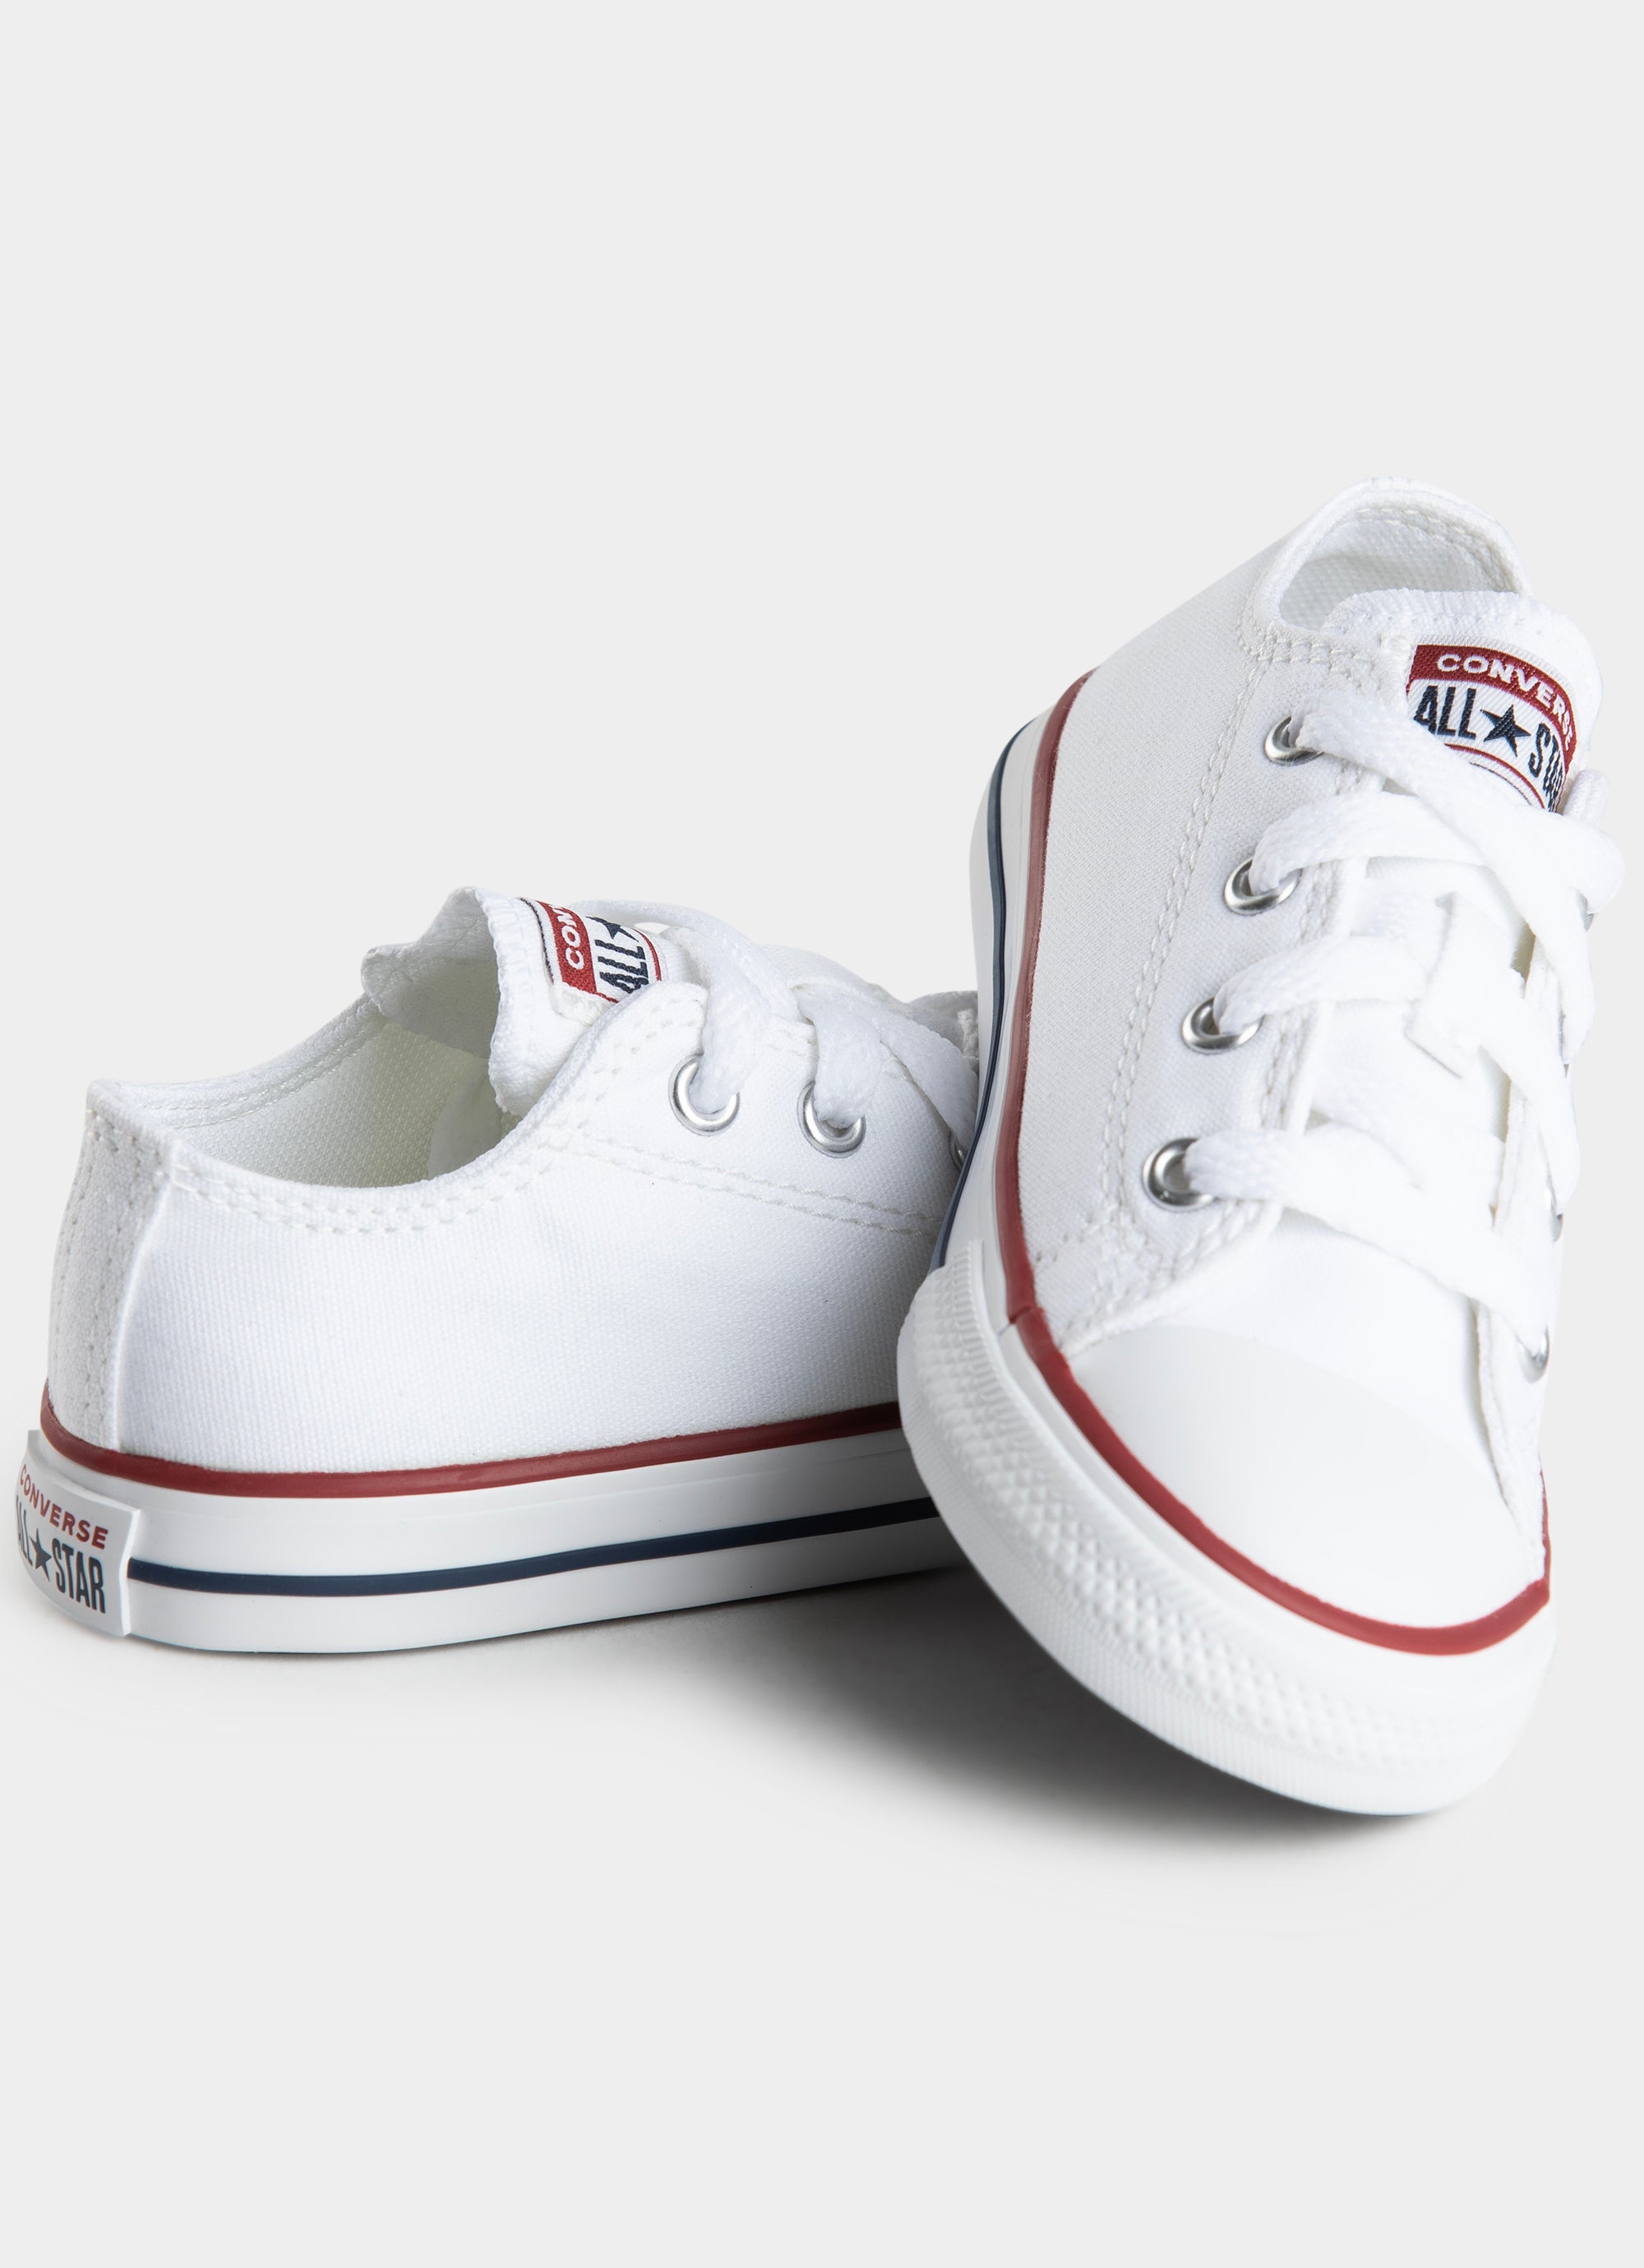 Converse Chuck Taylor All Star Low Shoe - Toddler in White | Red Rat